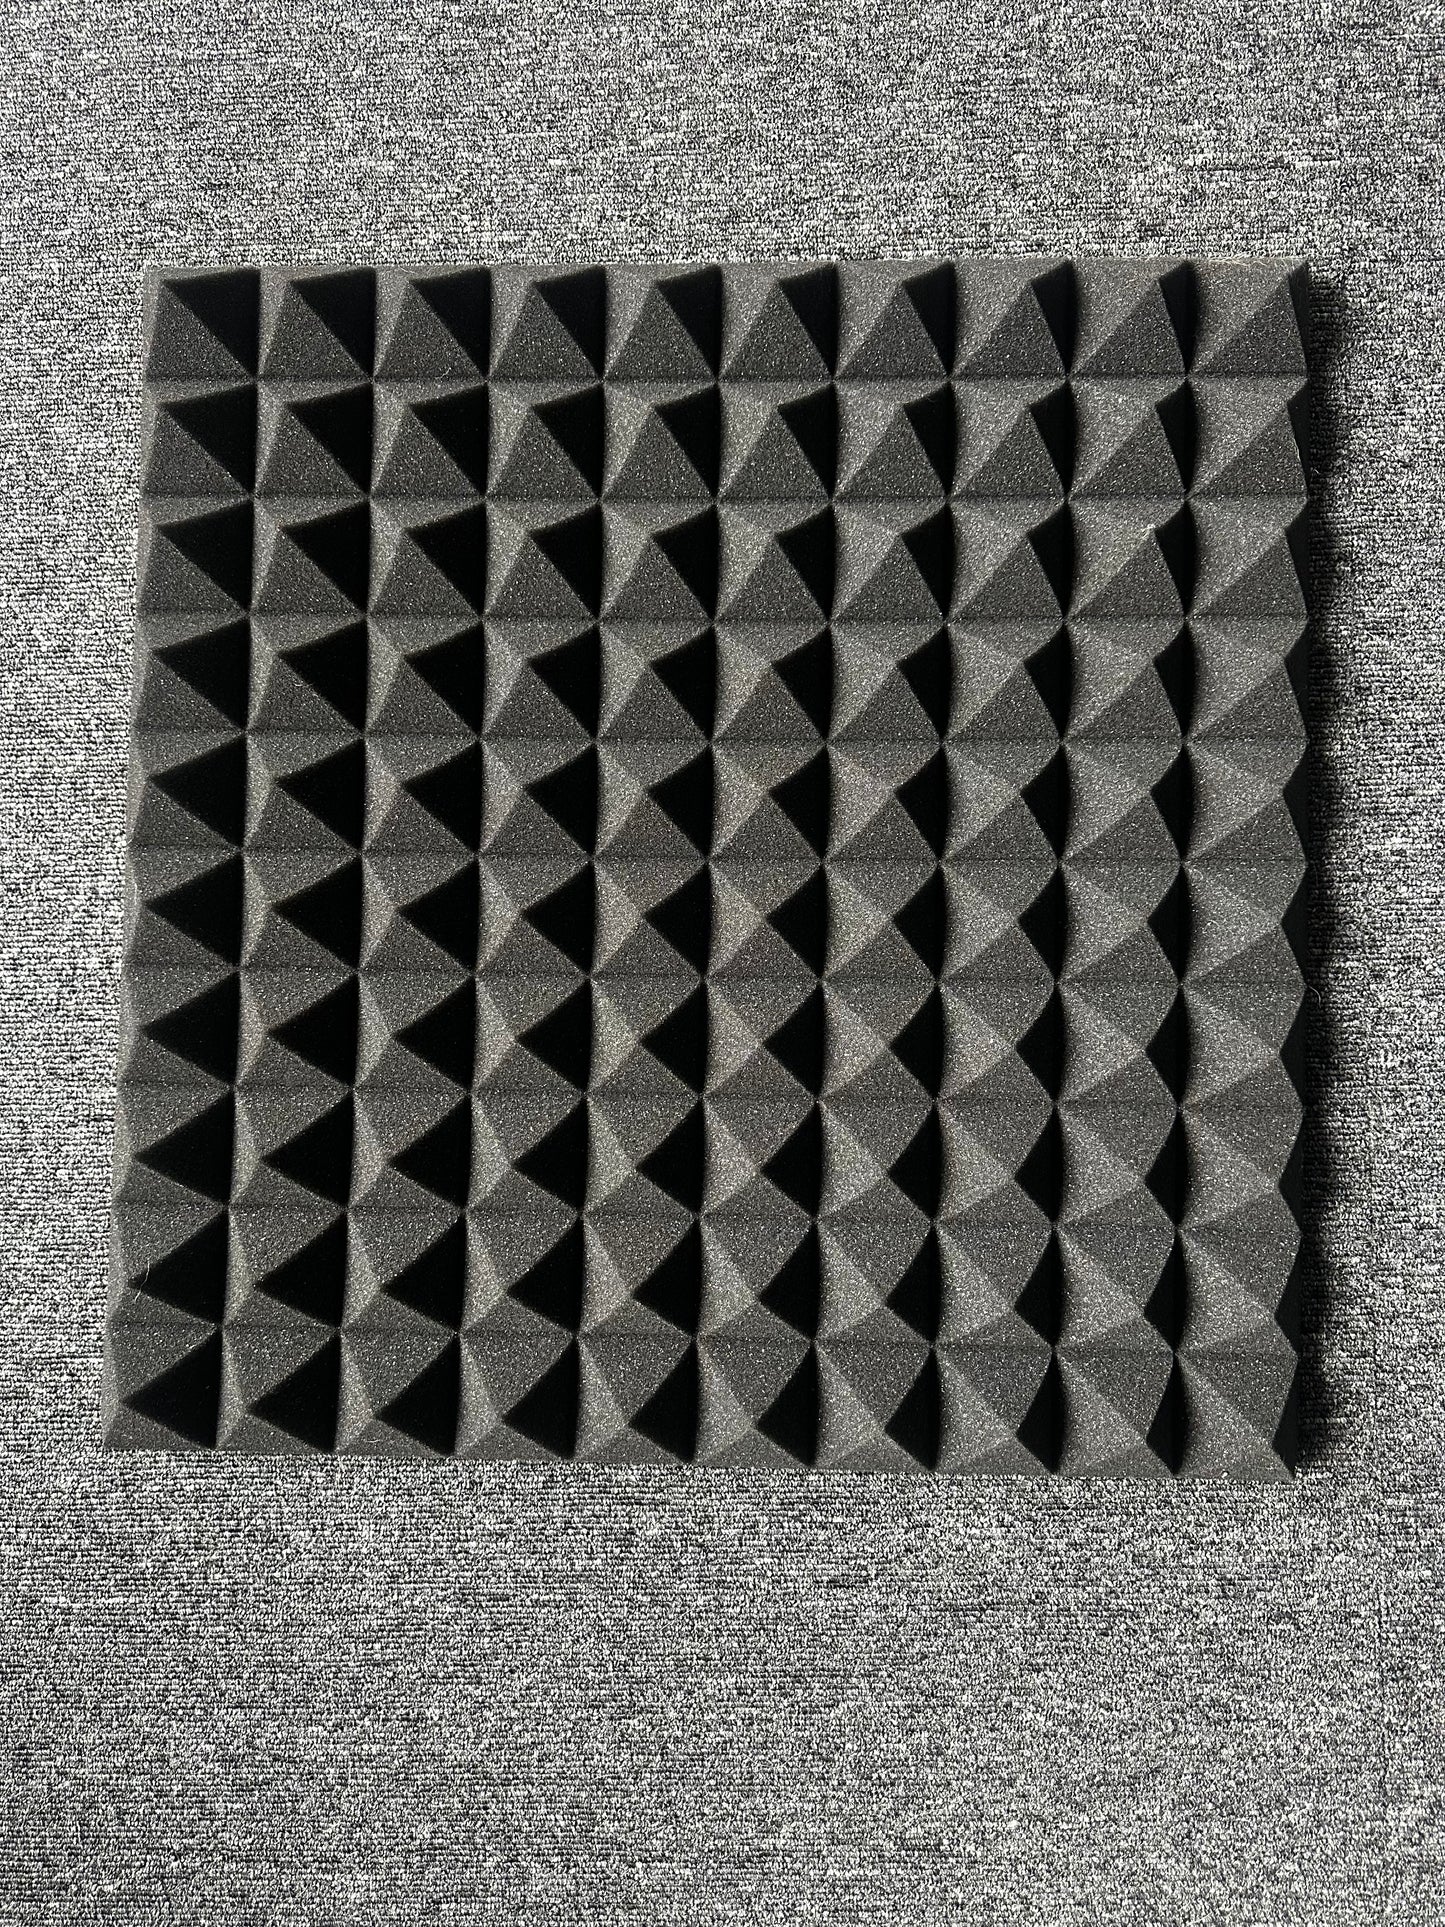 Sound Proof Foam Dampening Absorbing Acoustic Wall Panels 1